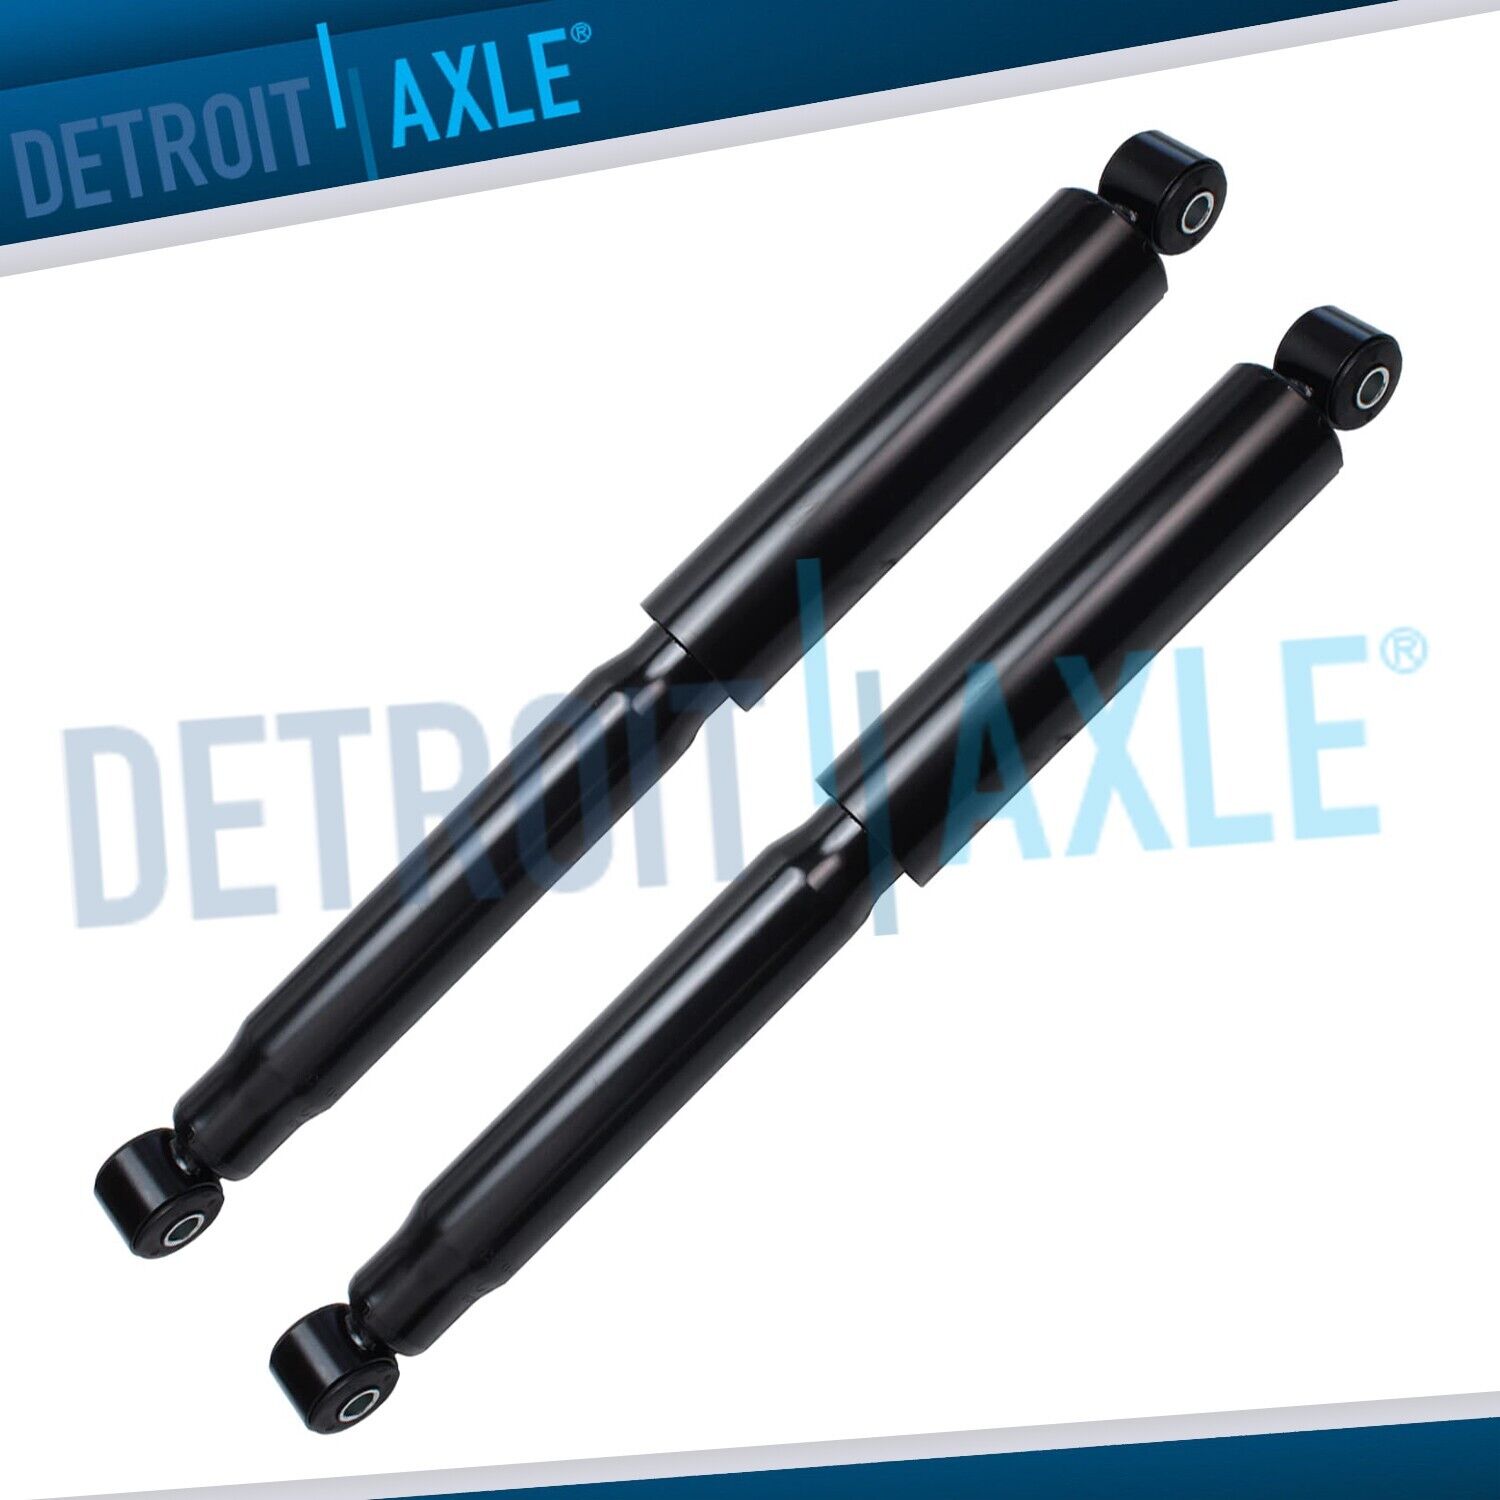 Pair Rear Shocks Absorbers for Suburban 1500 Tahoe Avalanche Escalade ESV EXT